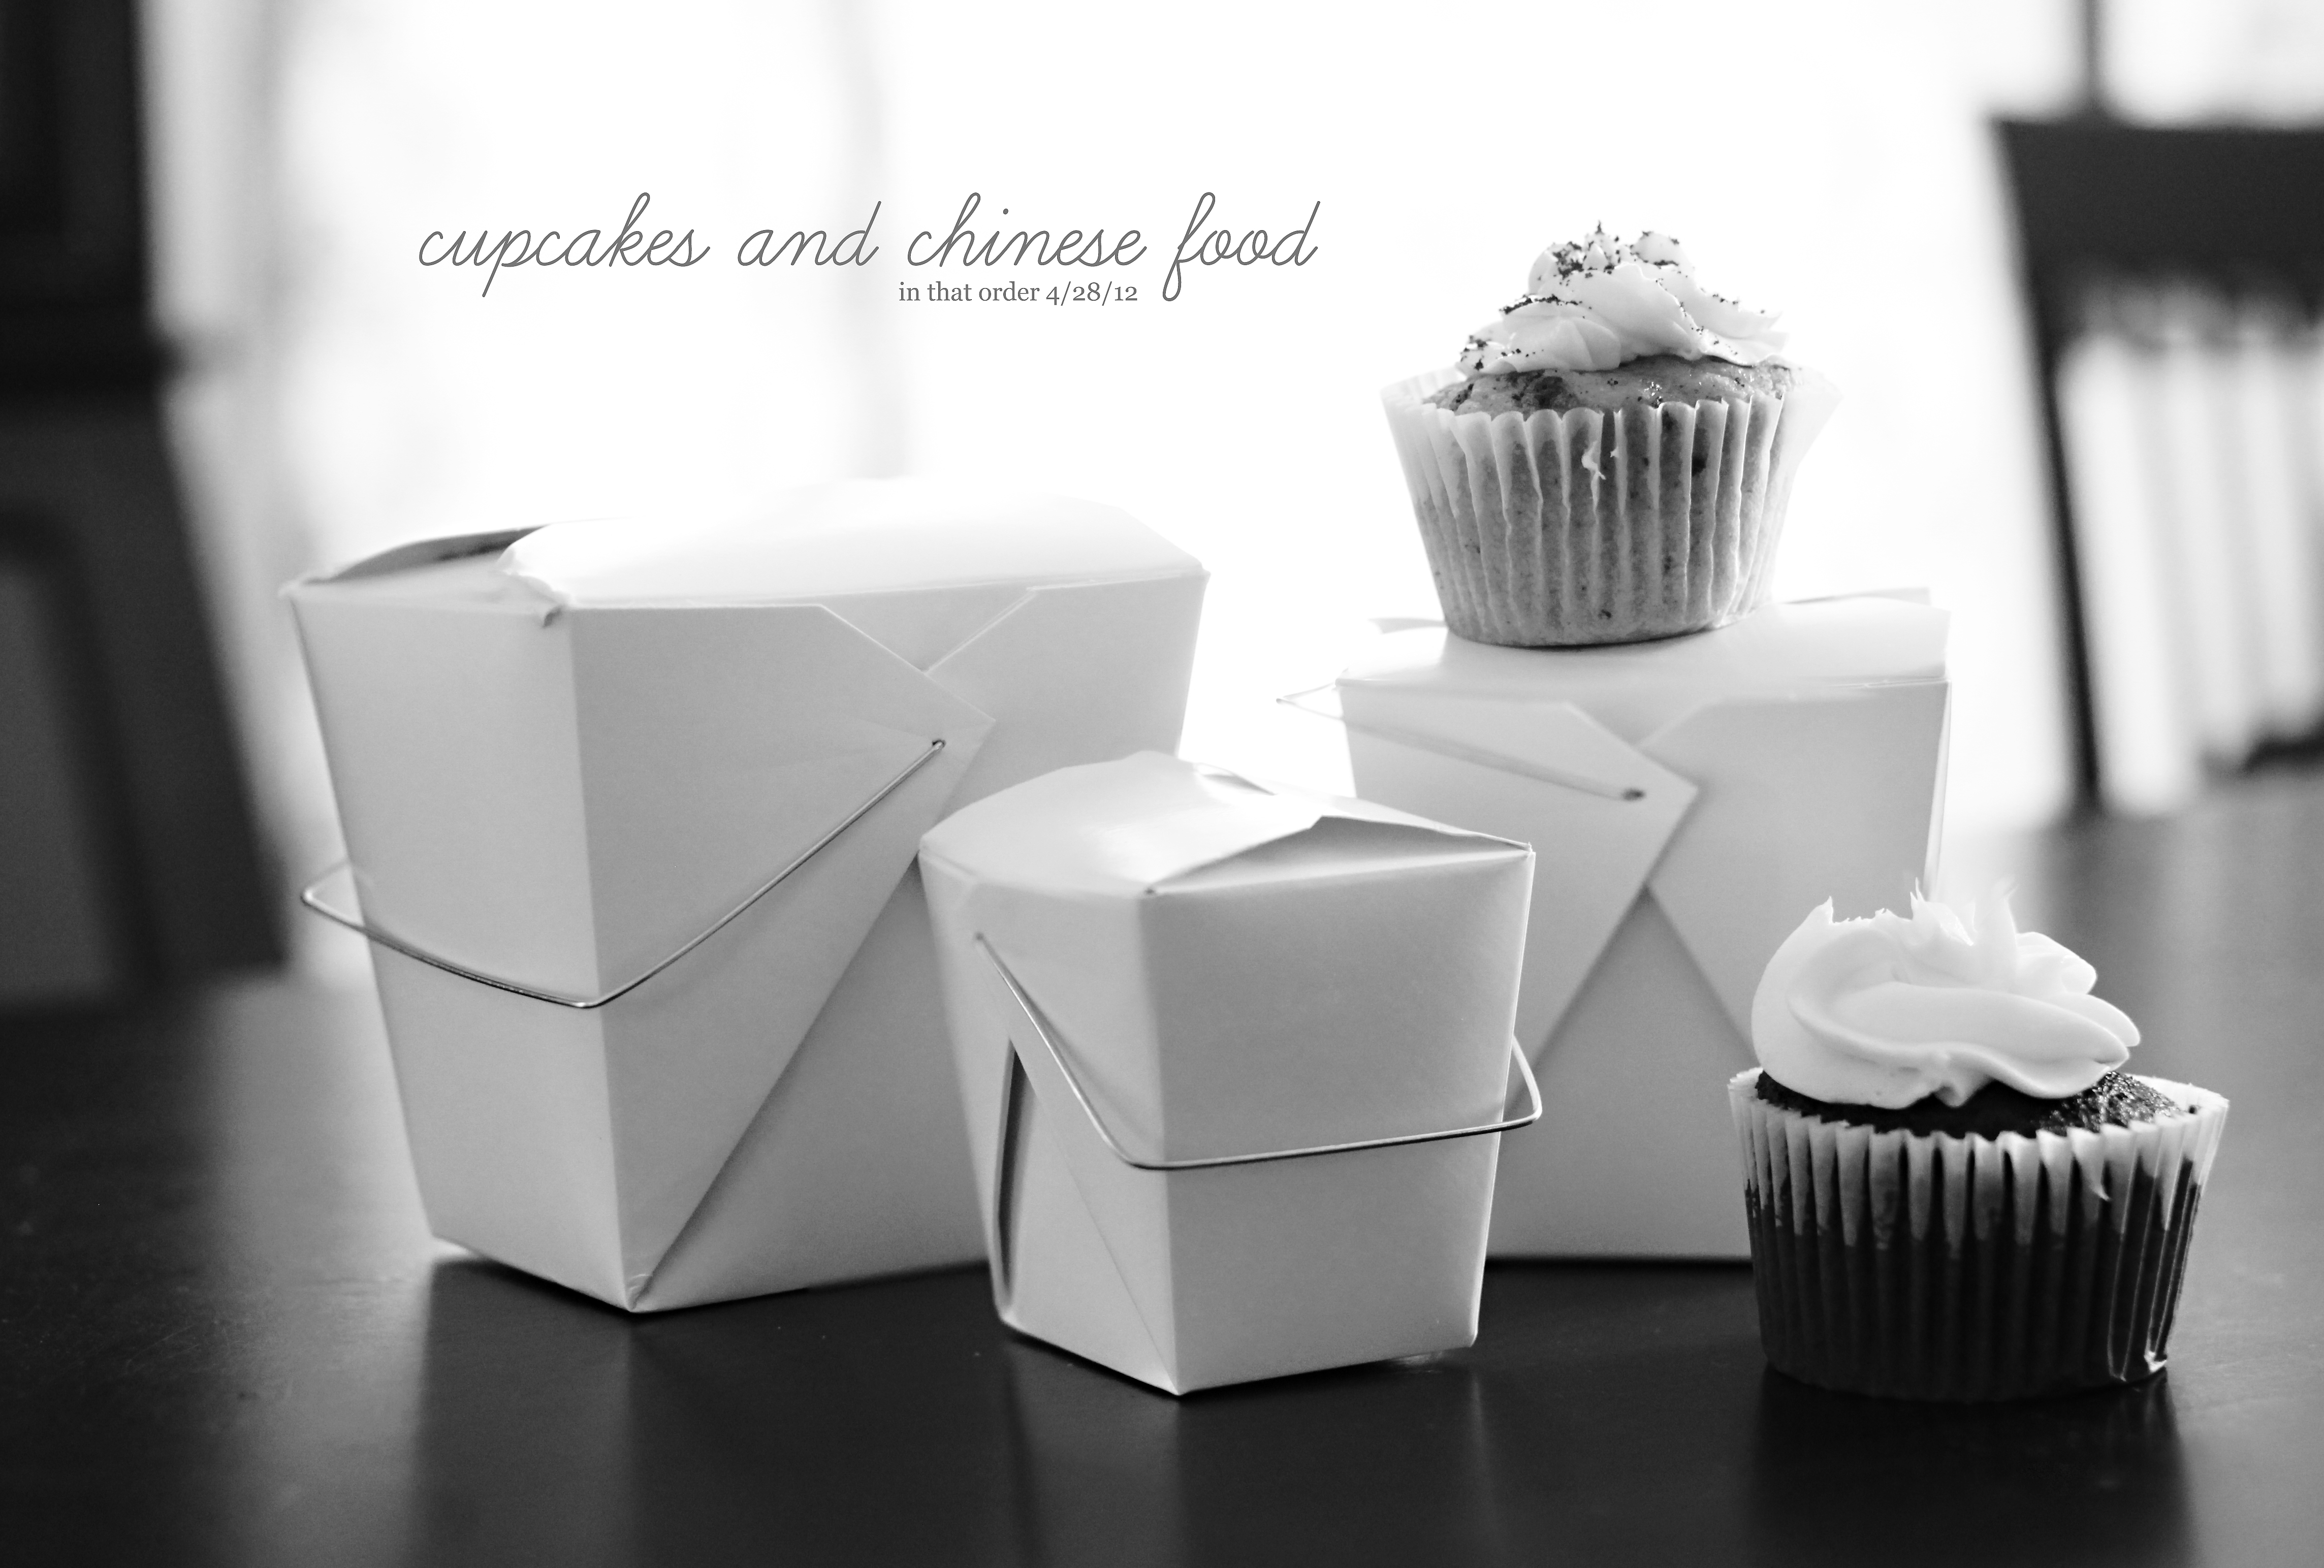 cupcakes and chinese food apr28.jpg :